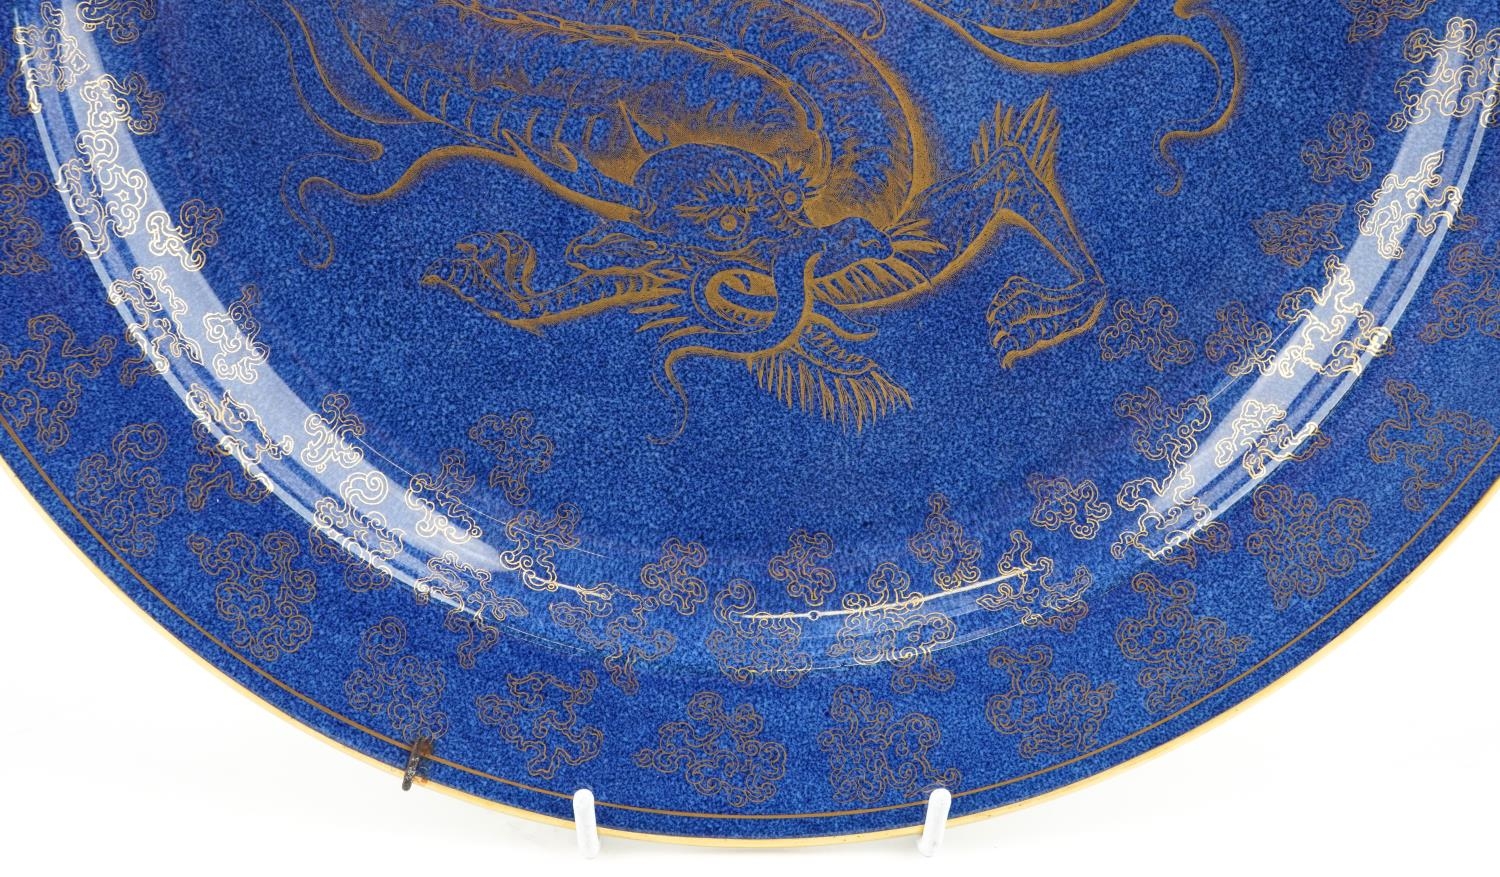 Wedgwood, aesthetic Chinese style powder blue ground lustre wall plaque gilded with a dragon amongst - Image 2 of 4